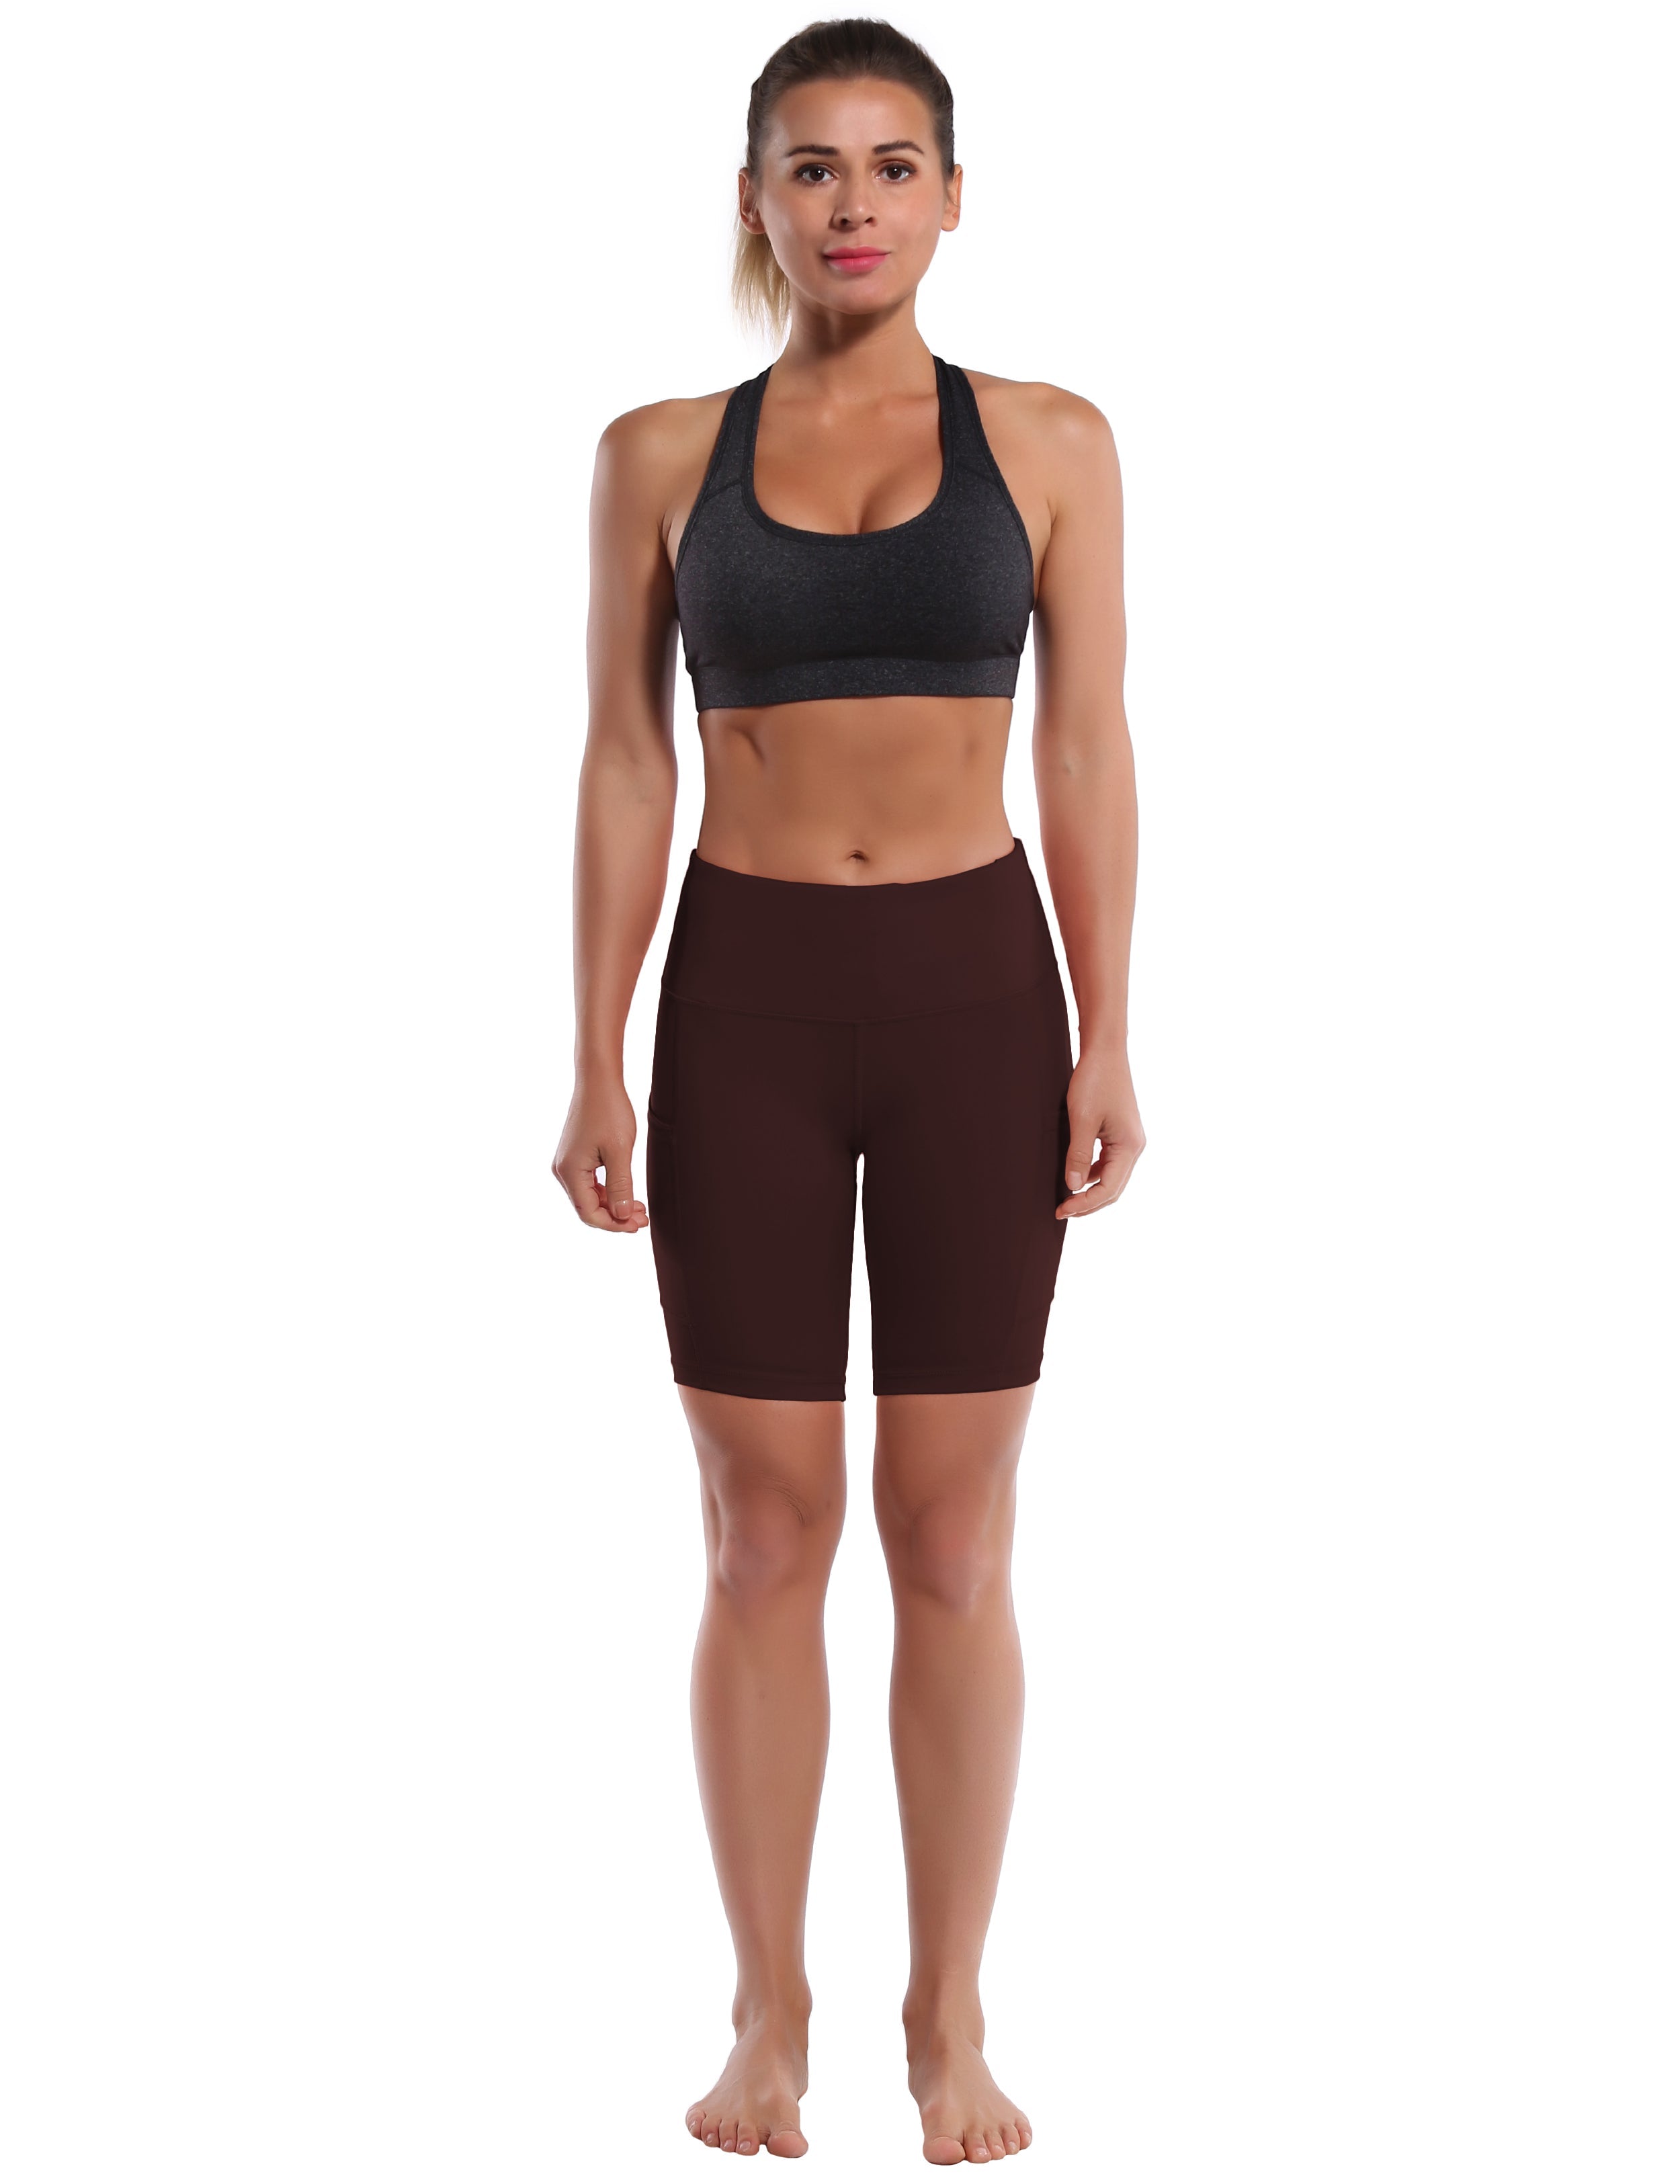 8" Side Pockets Yoga Shorts mahoganymaroon Sleek, soft, smooth and totally comfortable: our newest style is here. Softest-ever fabric High elasticity High density 4-way stretch Fabric doesn't attract lint easily No see-through Moisture-wicking Machine wash 75% Nylon, 25% Spandex